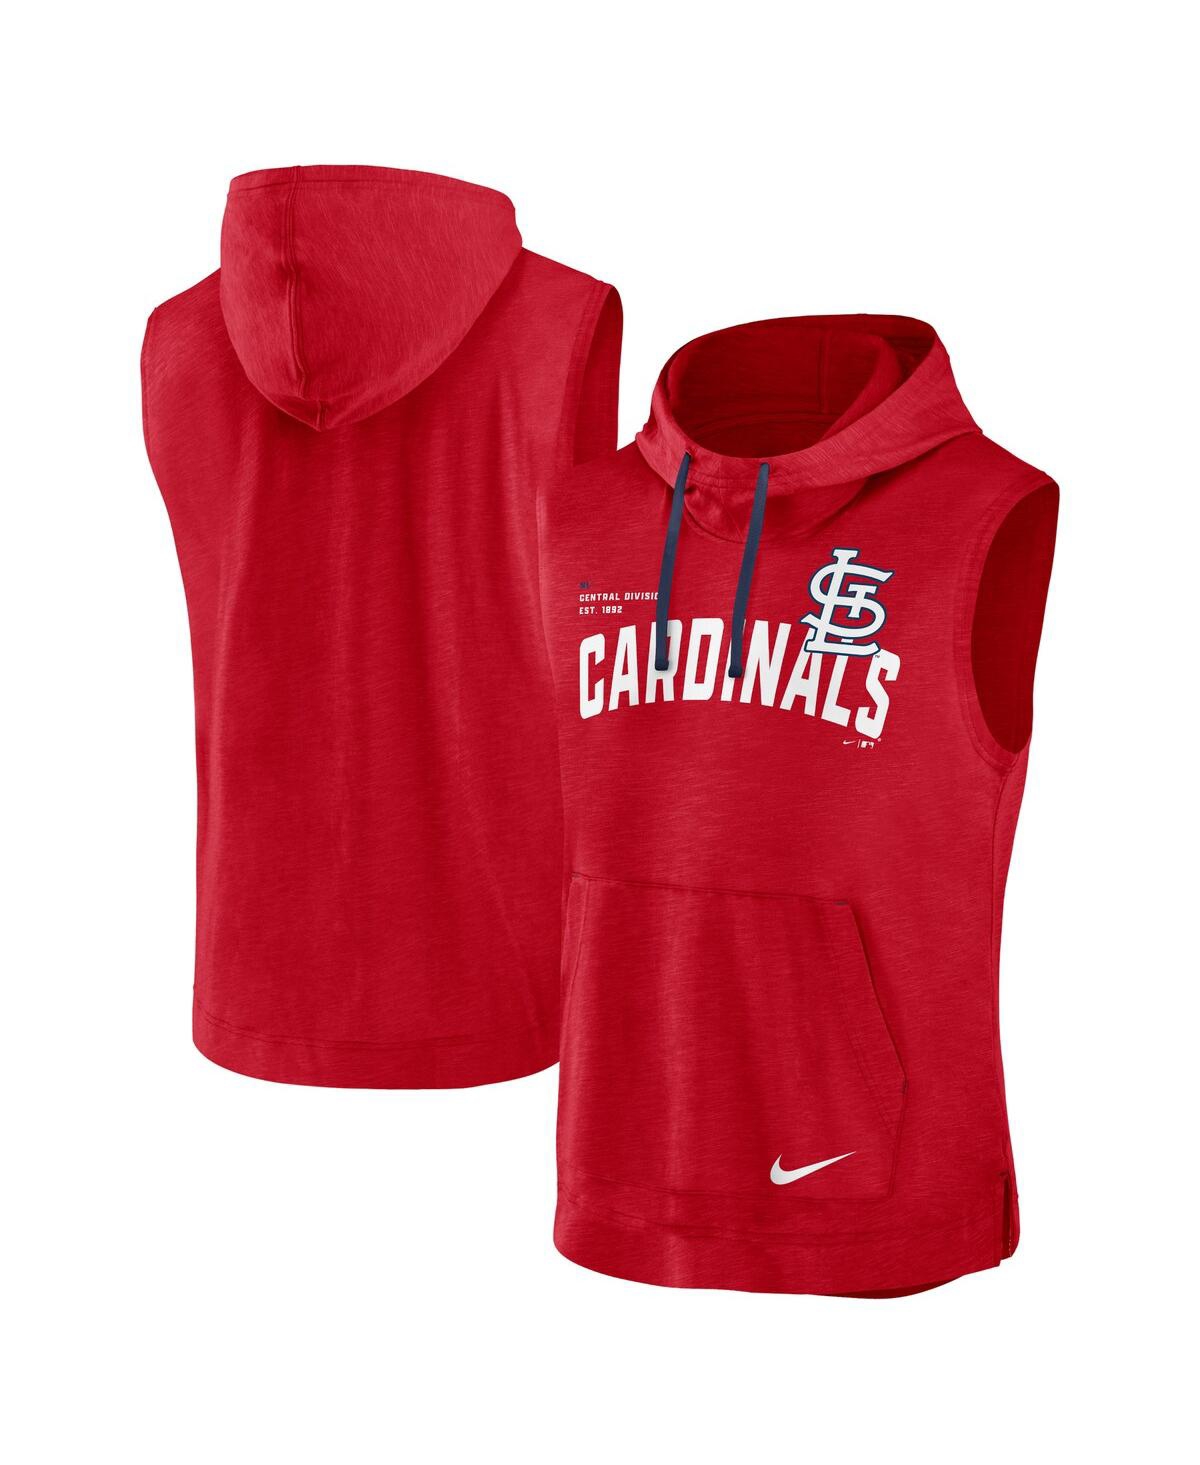 Nike Men's  Red St. Louis Cardinals Athletic Sleeveless Hooded T-shirt